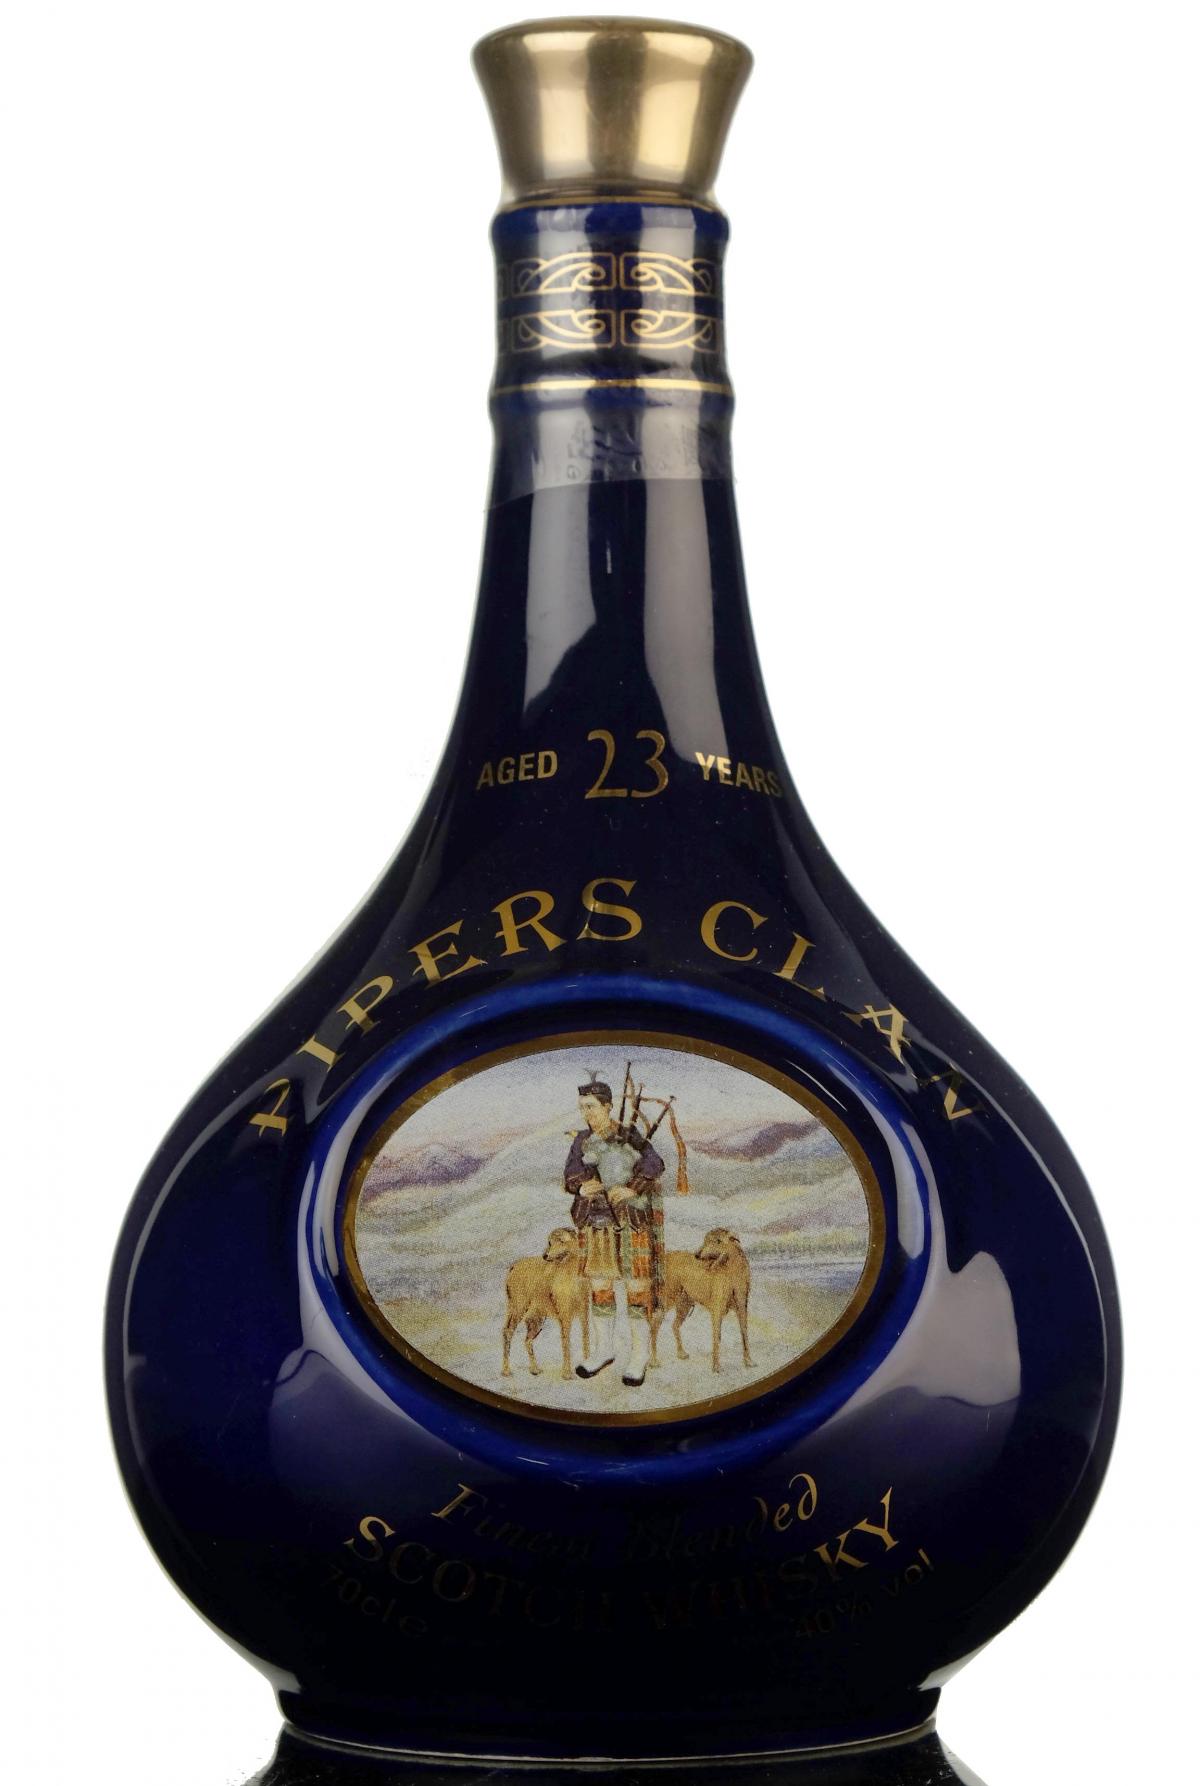 Pipers Clan 23 Years Old Ceramic Decanter